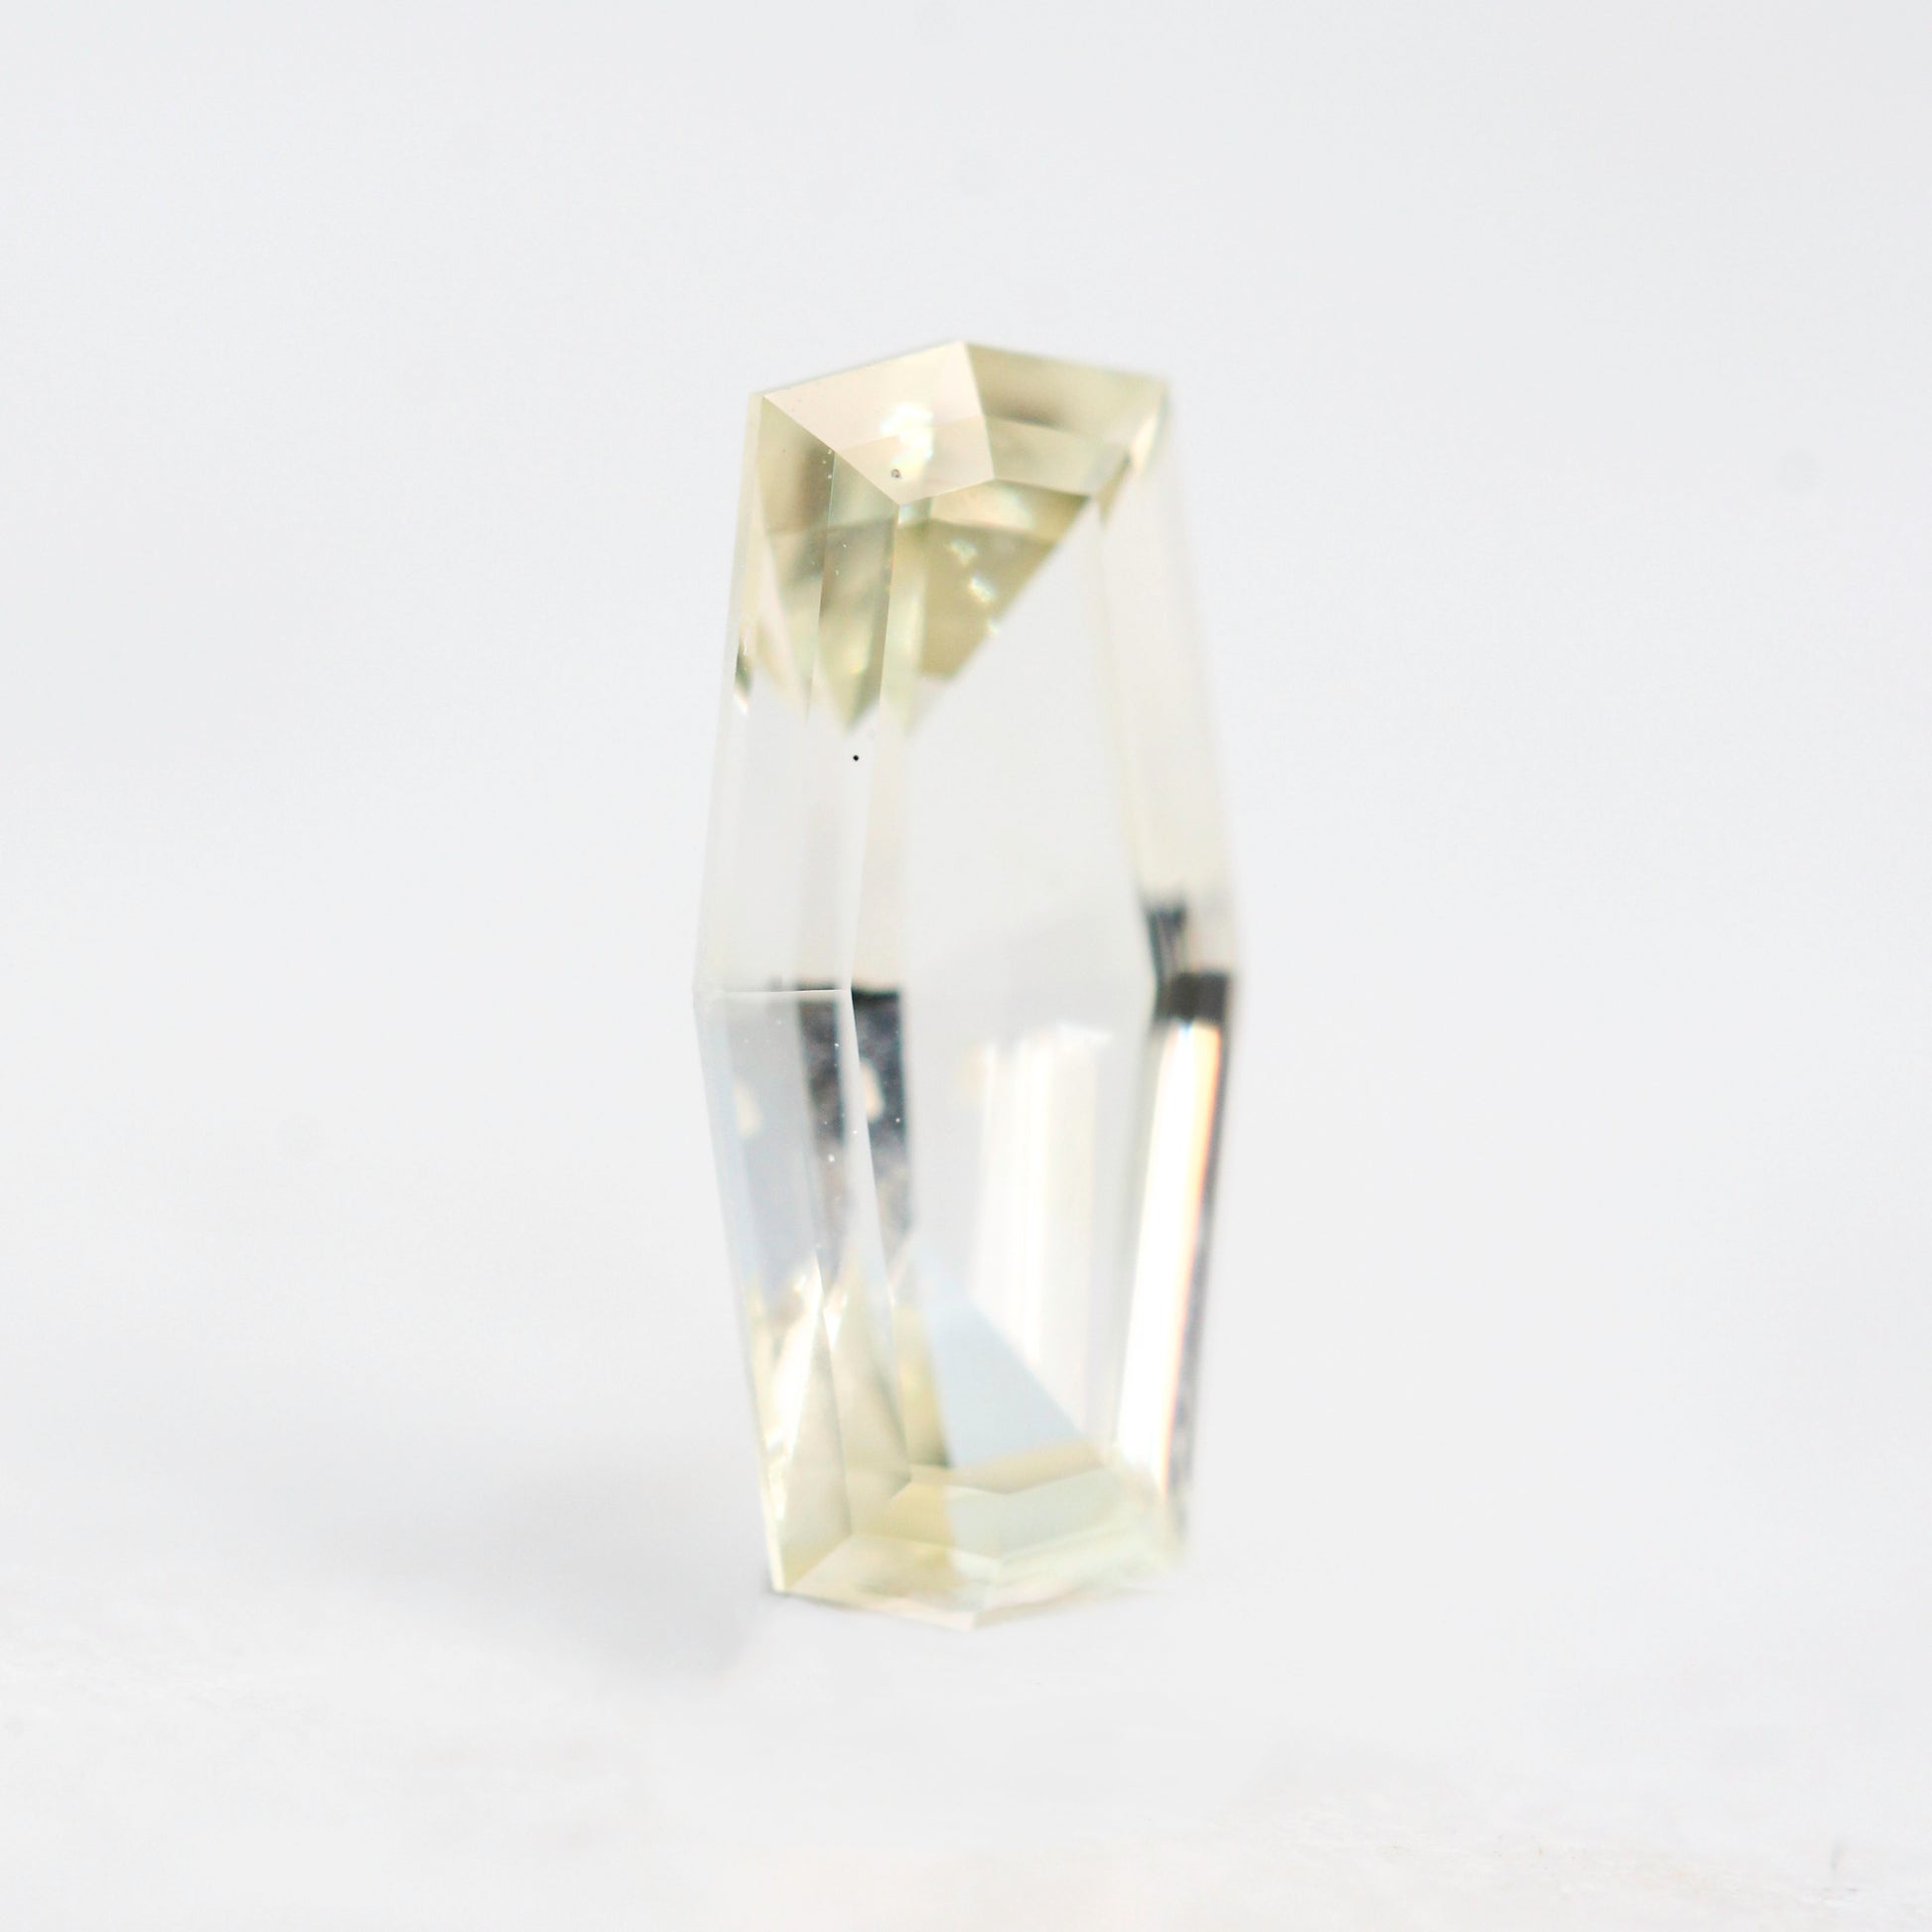 1.05 Carat Clear Golden Geometric Sapphire for Custom Work - Inventory Code CGS105 - Midwinter Co. Alternative Bridal Rings and Modern Fine Jewelry